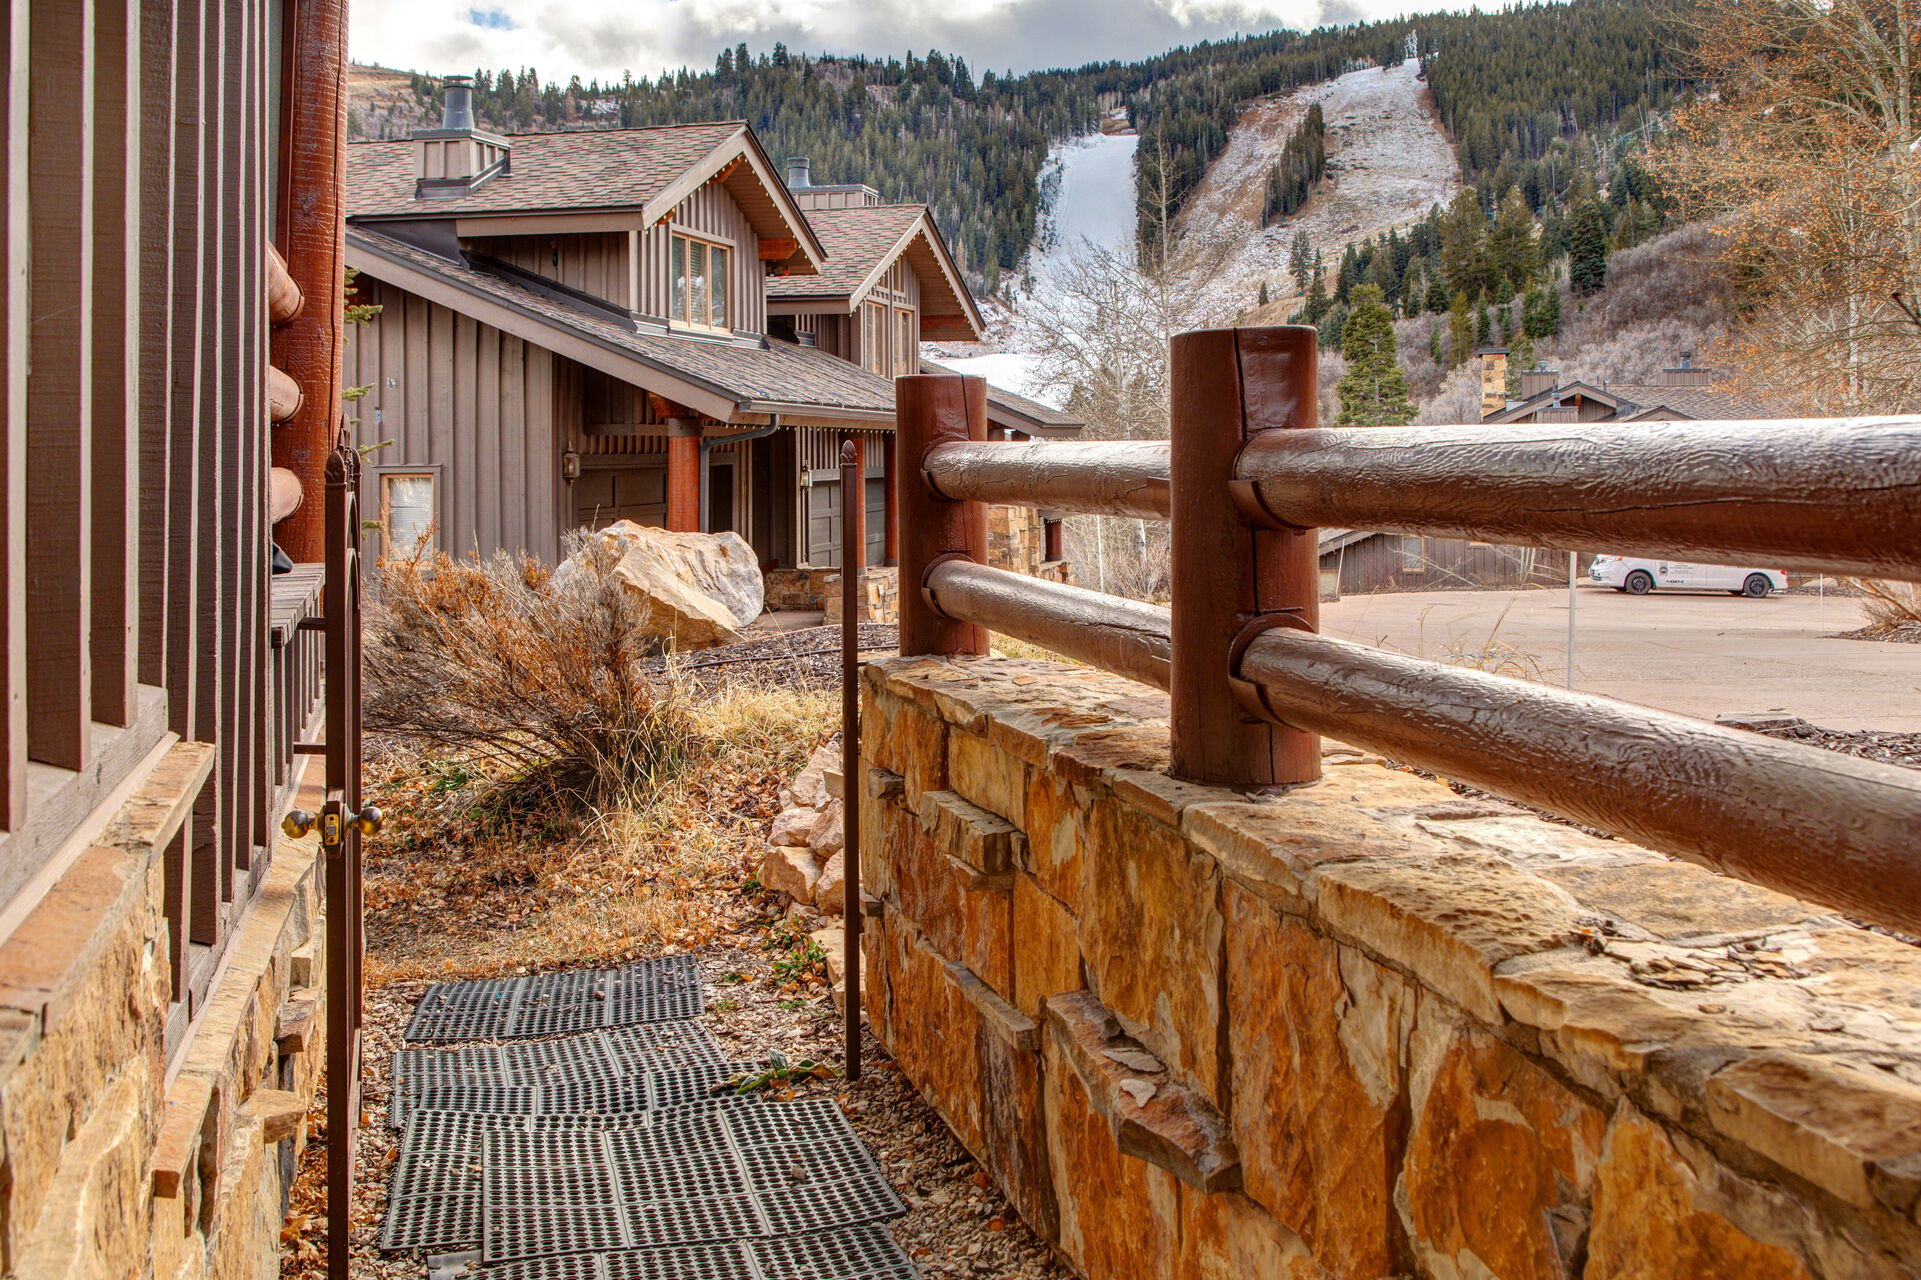 Mid Level Ski Access with equipment hooks, ski trail access, and outdoor ski storage